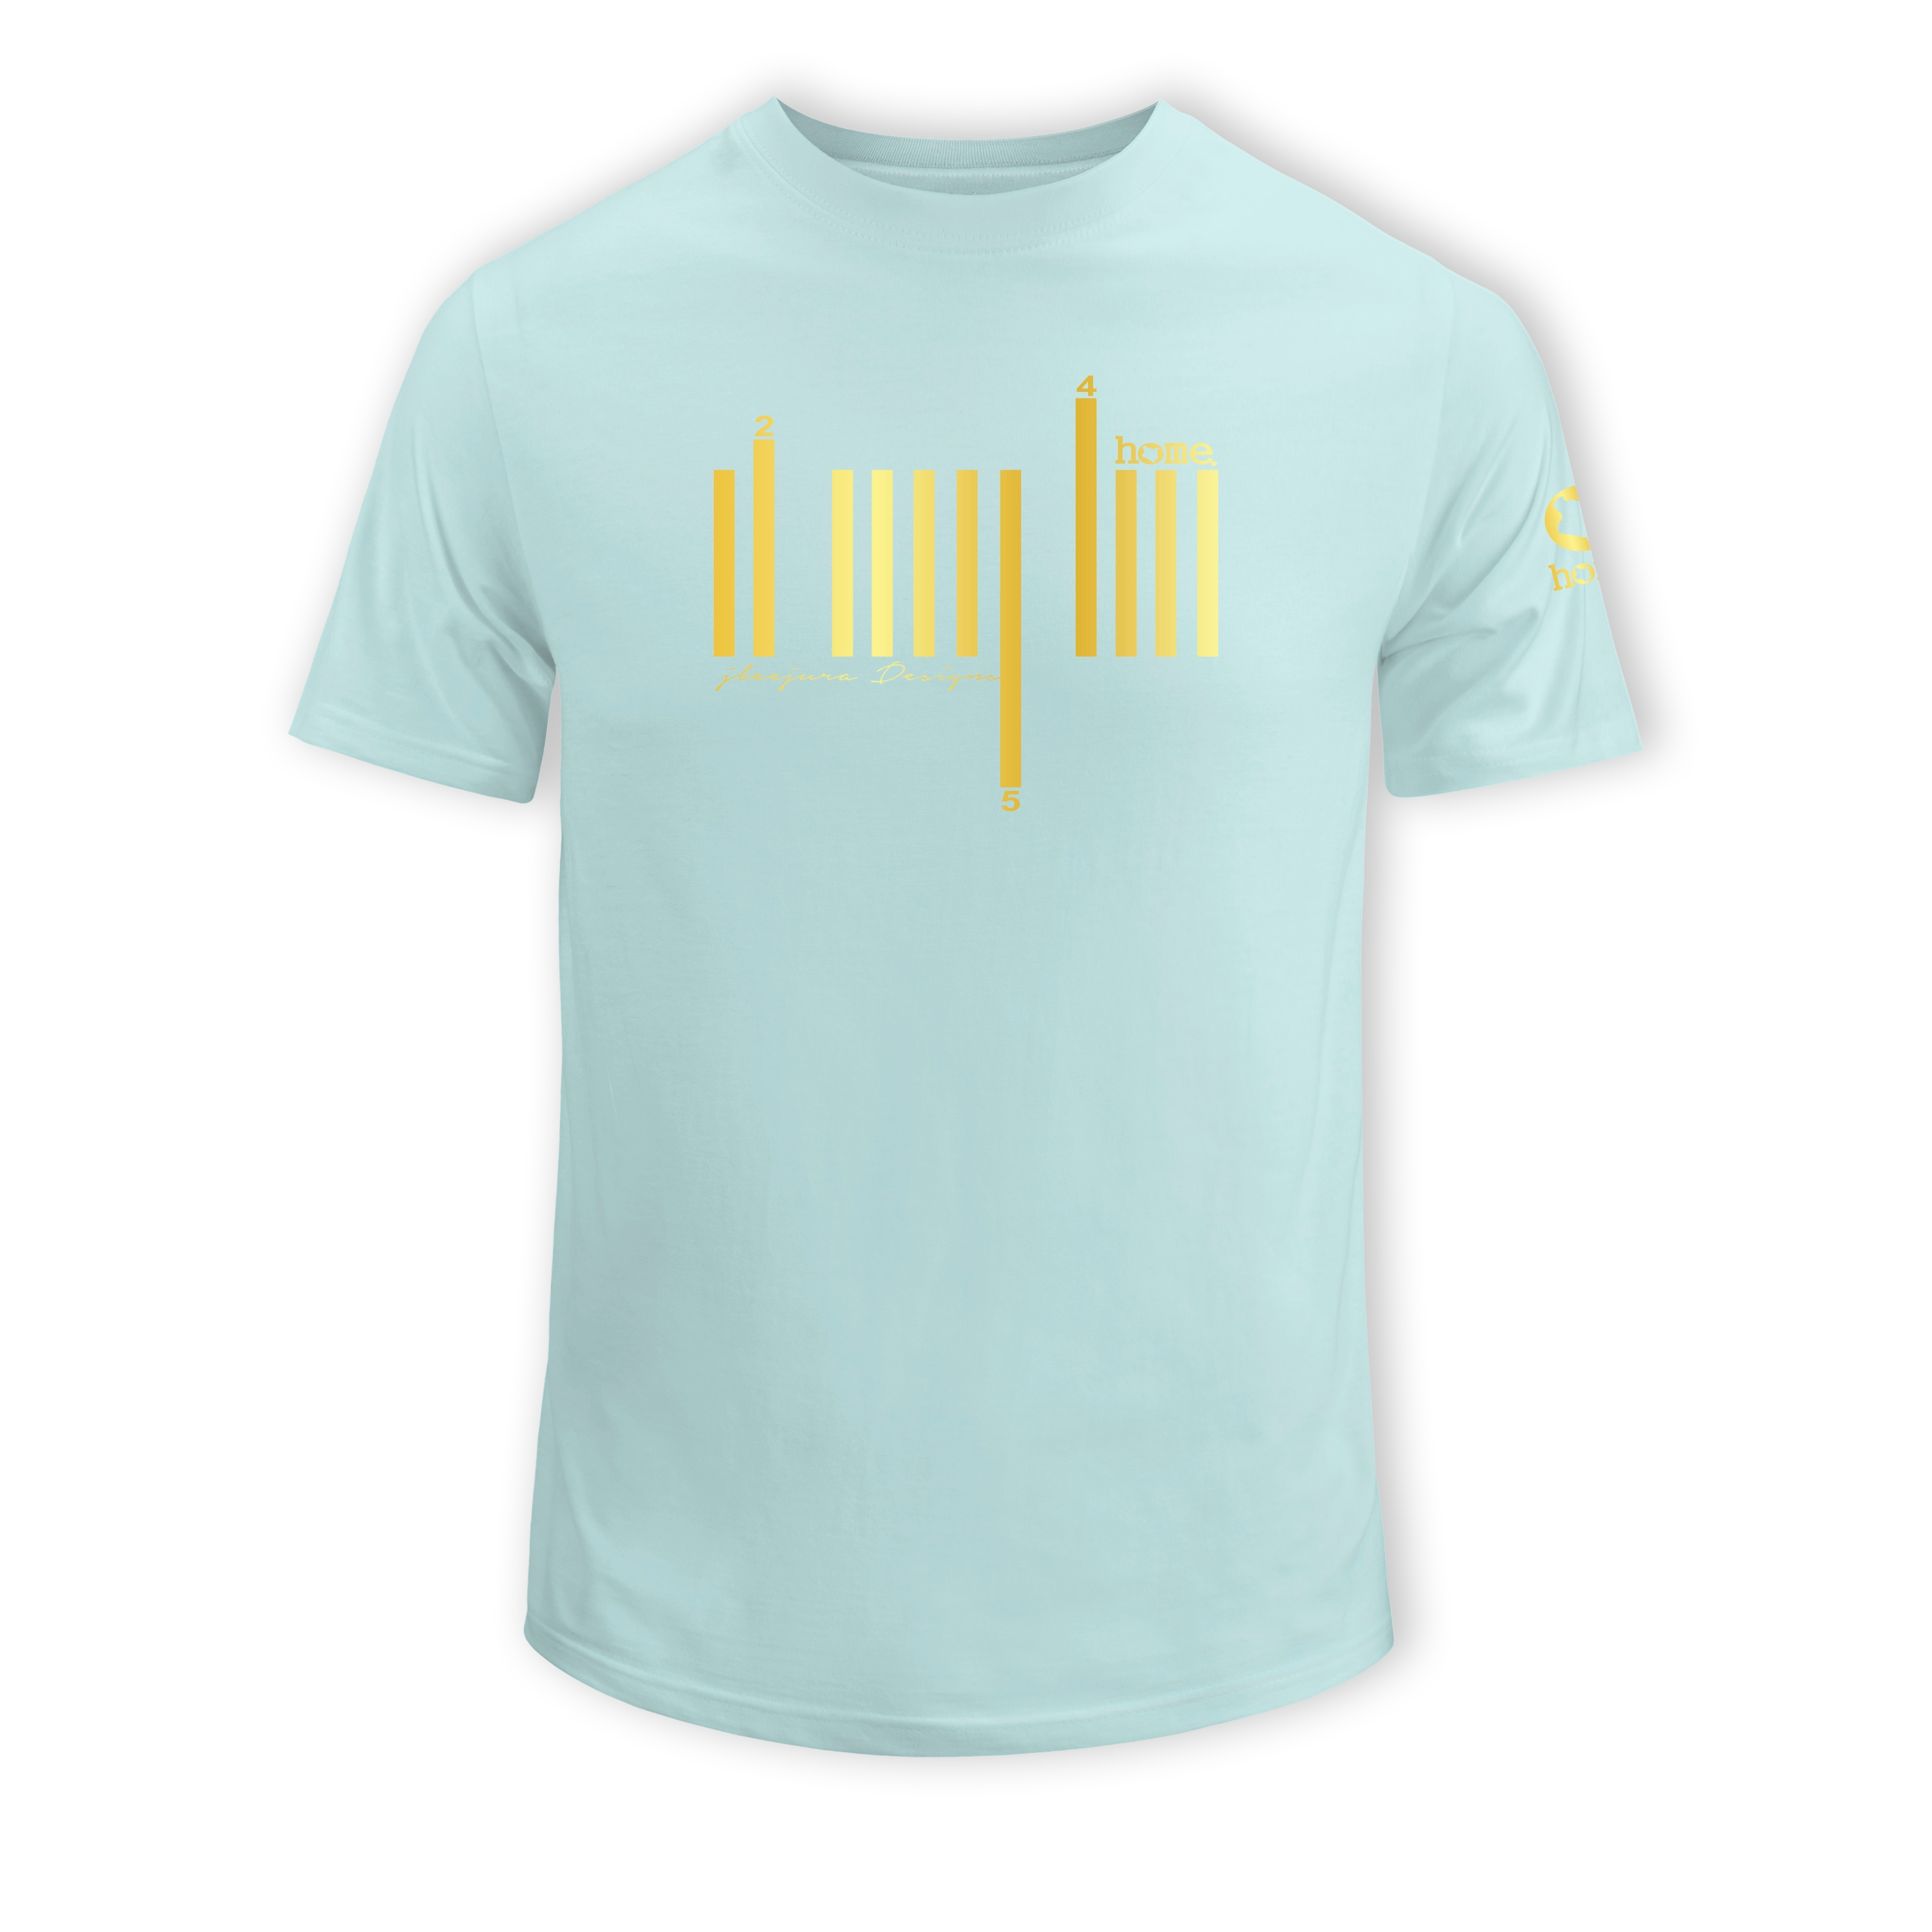 home_254 SHORT-SLEEVED MISTY BLUE T-SHIRT WITH A GOLD BARS PRINT – COTTON PLUS FABRIC